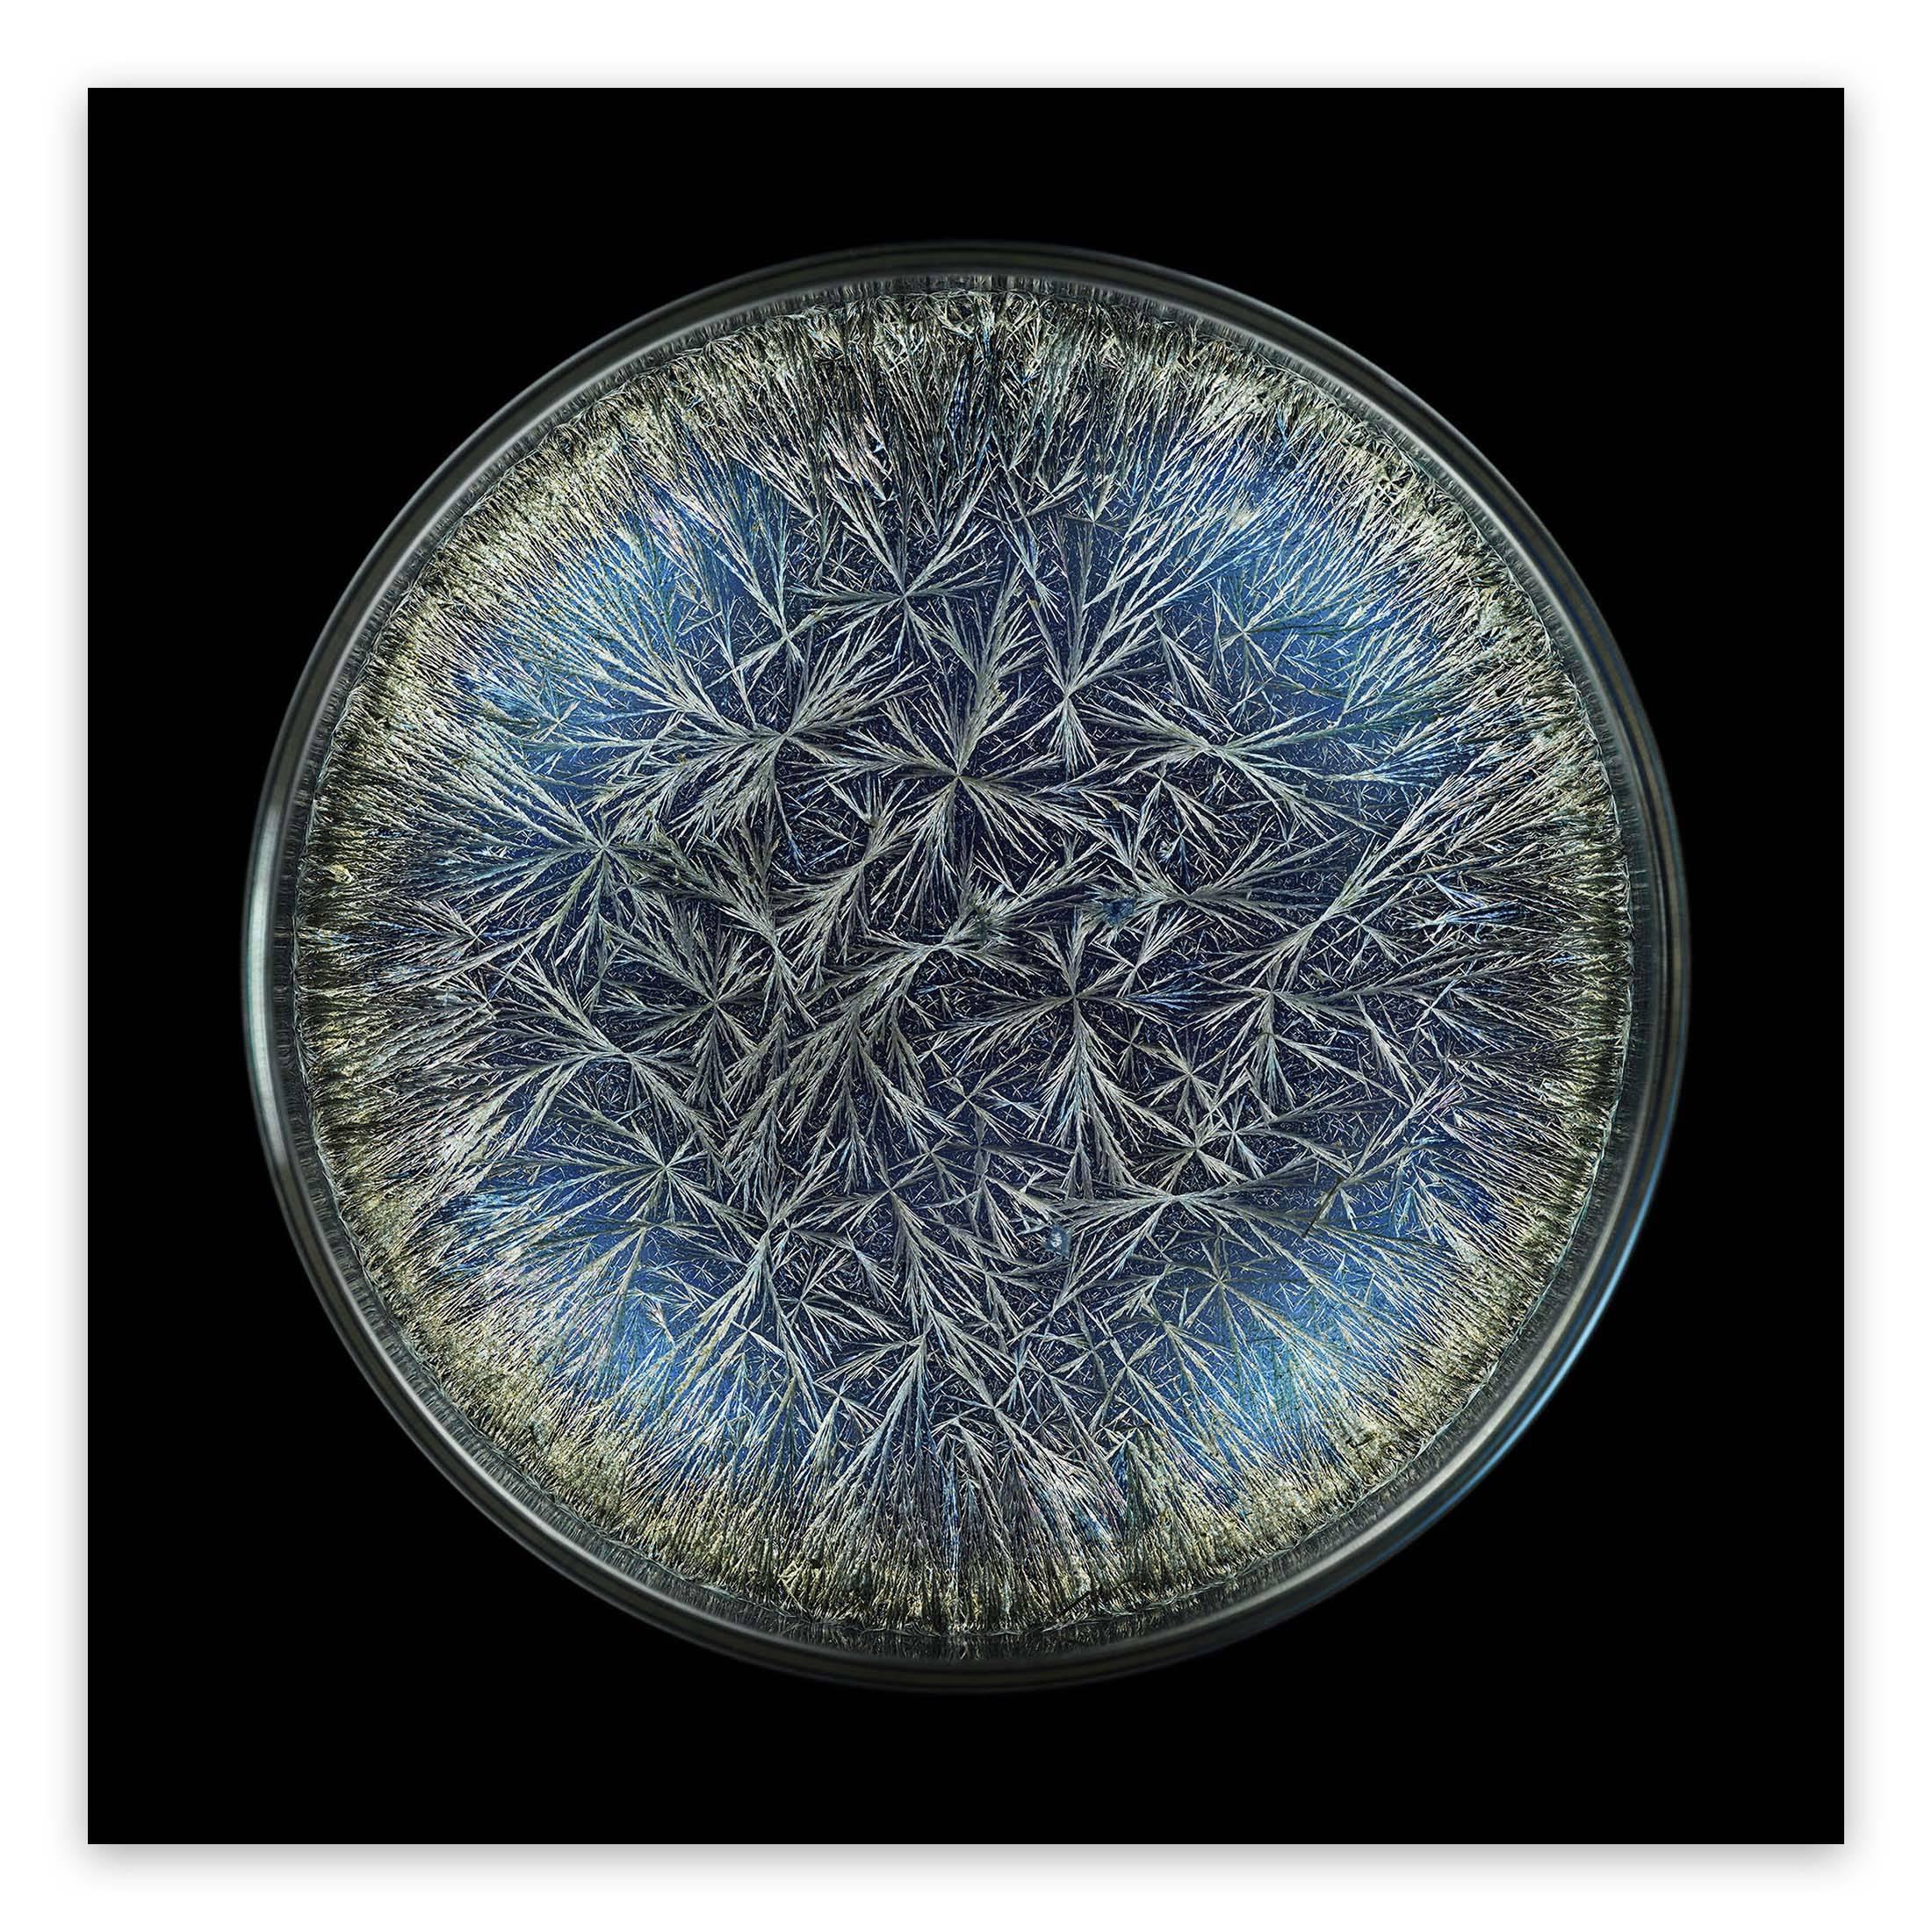 Morphogenetic field - Dandelion (Pissenlit) (Abstract Photography)

Chromogenic print. Edition 1/5.

In his Morphogenetic fields series, Janiak examines the visible manifestation of the essence of various substances. Every entity in the universe